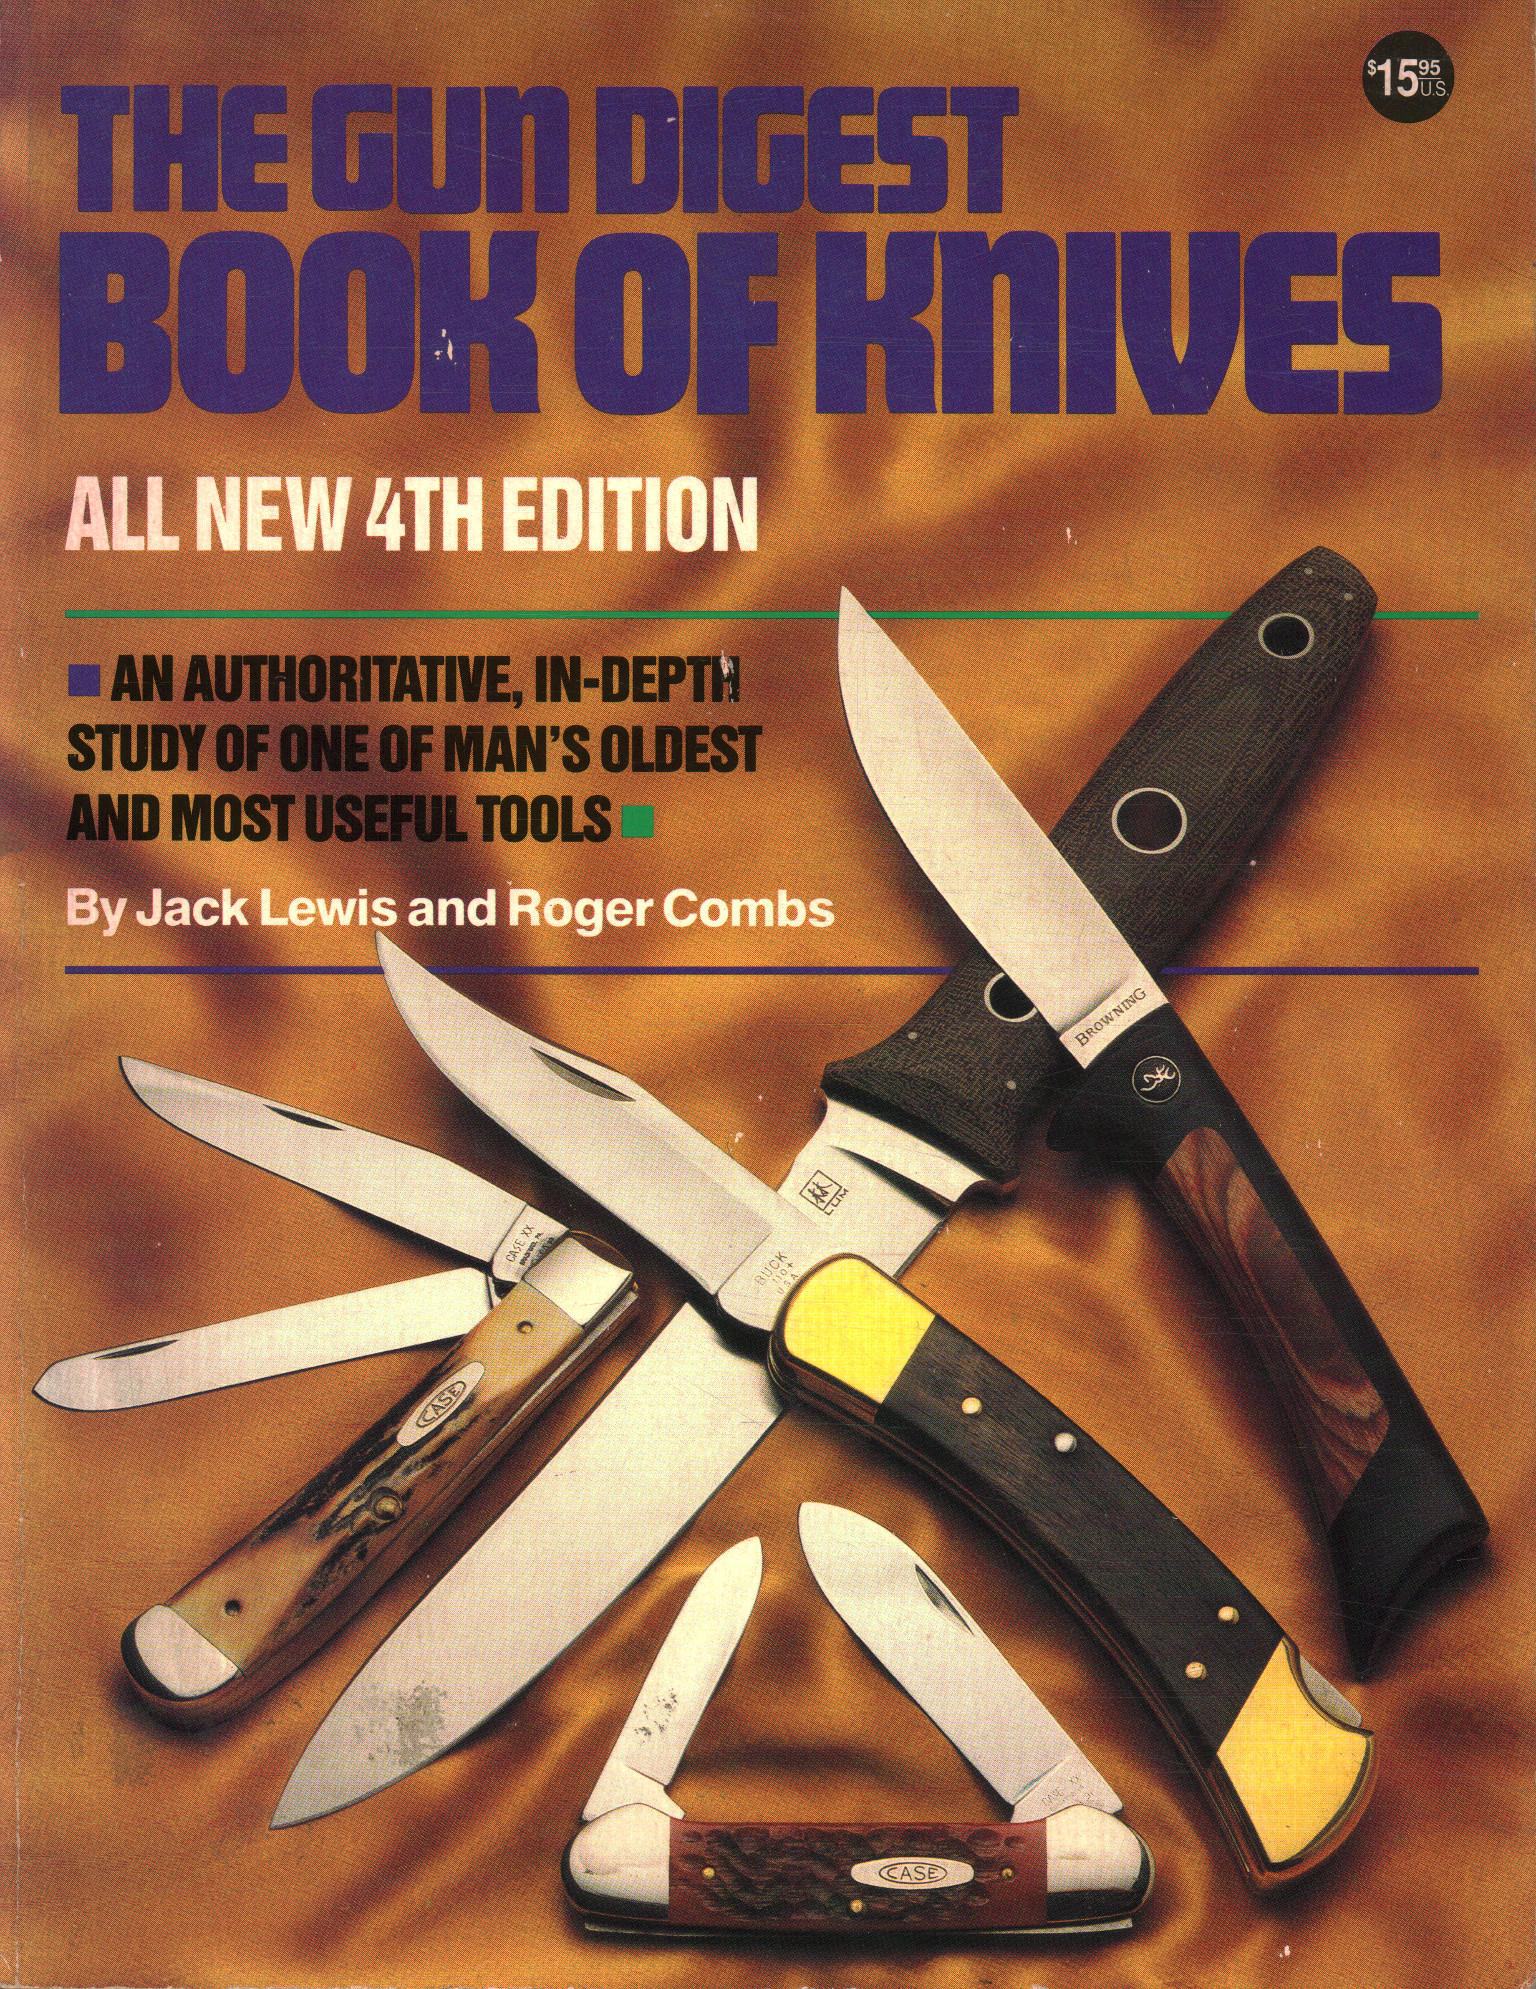 Books - Manuals - Collectibles, Gun Digest Book of Knives